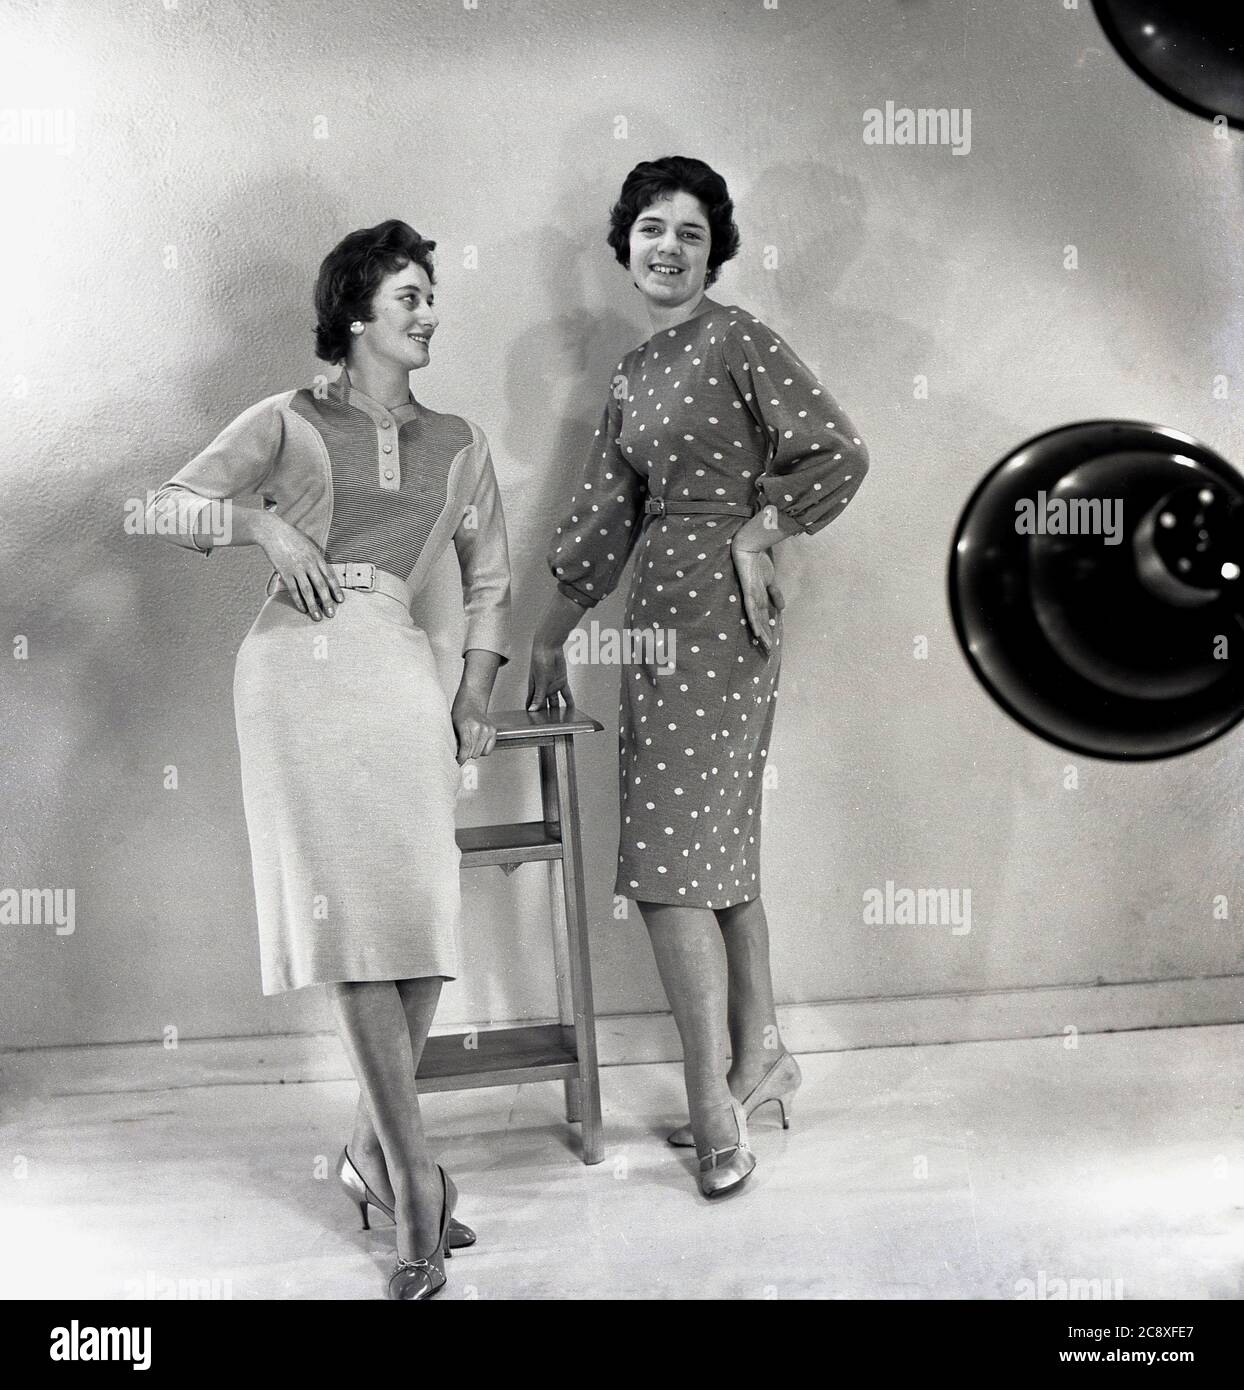 1950s, historical, two young ladies in a studio modelling the latest female fashions, including a woollen top and skirt and spotted or polka dot dress, England, UK. Stock Photo